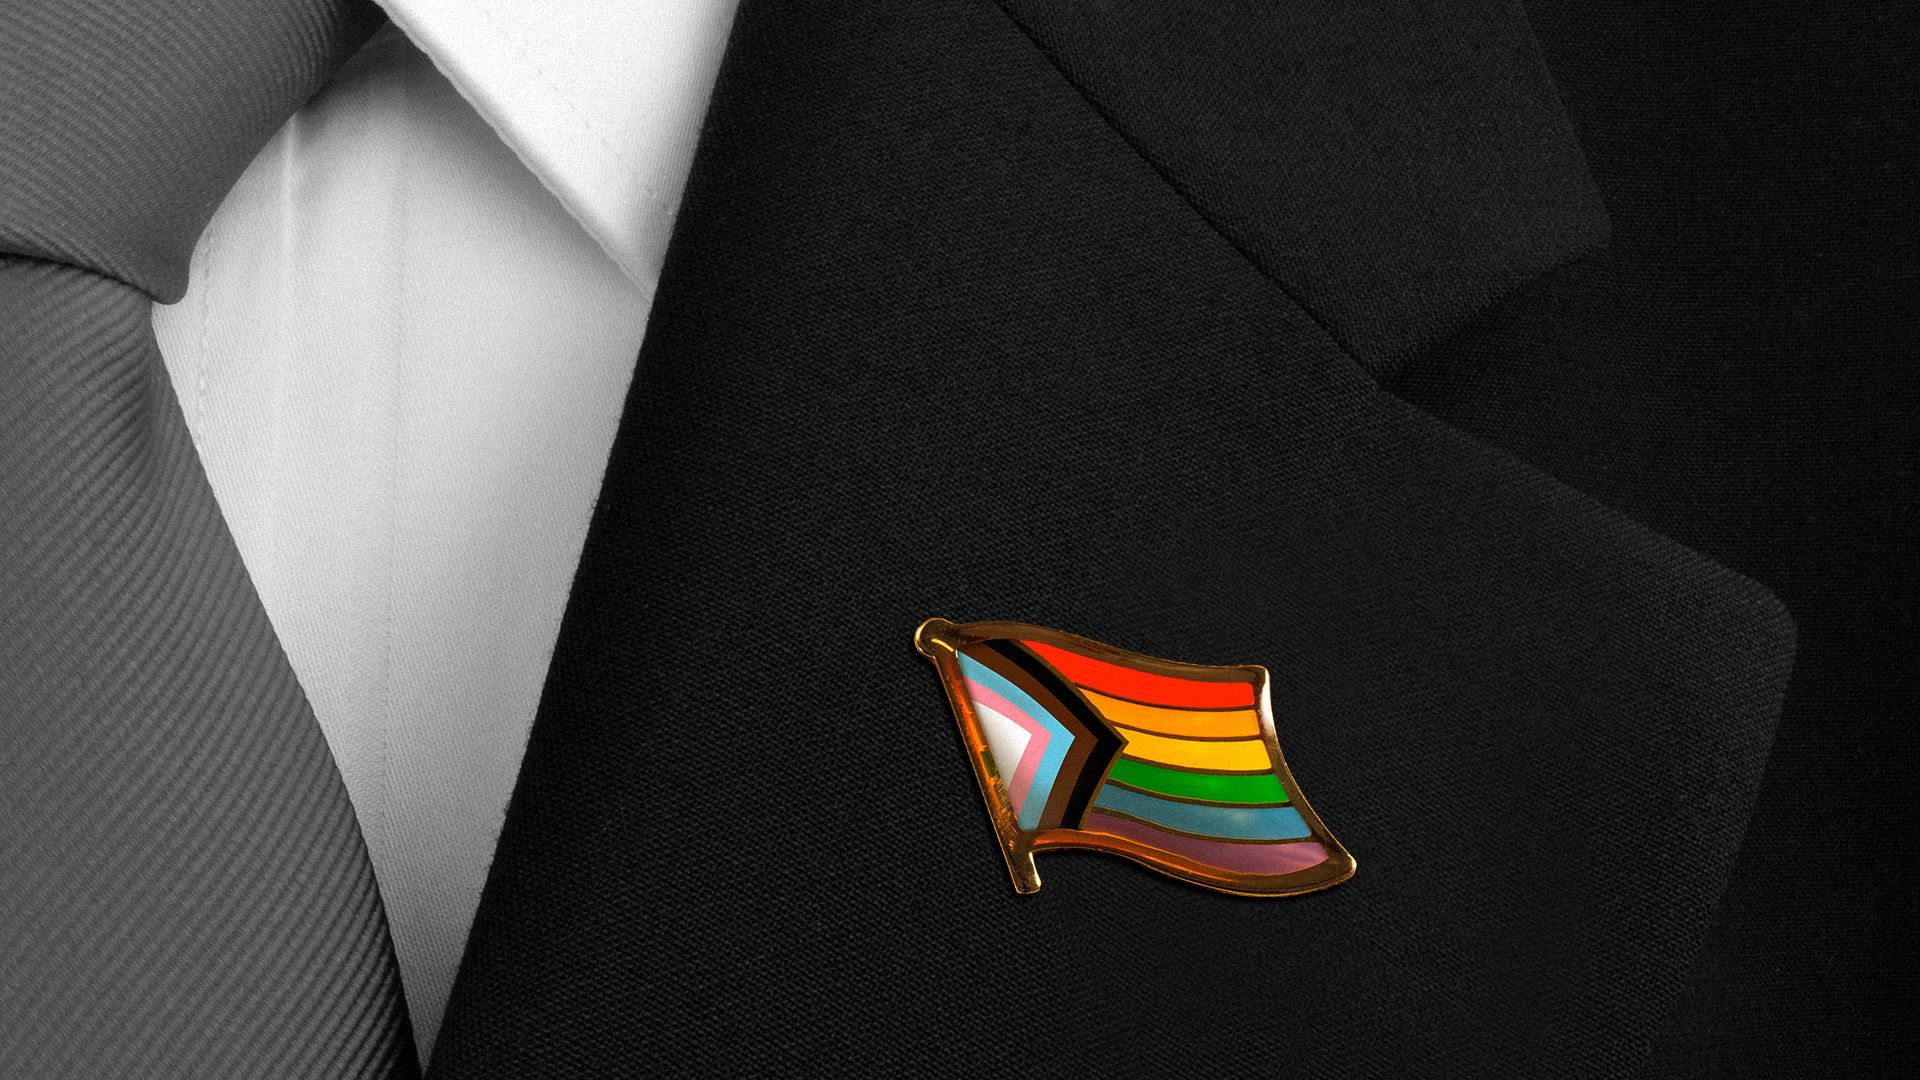 Illustration of an LGBTQ+ flag pin on the lapel of a business suit.